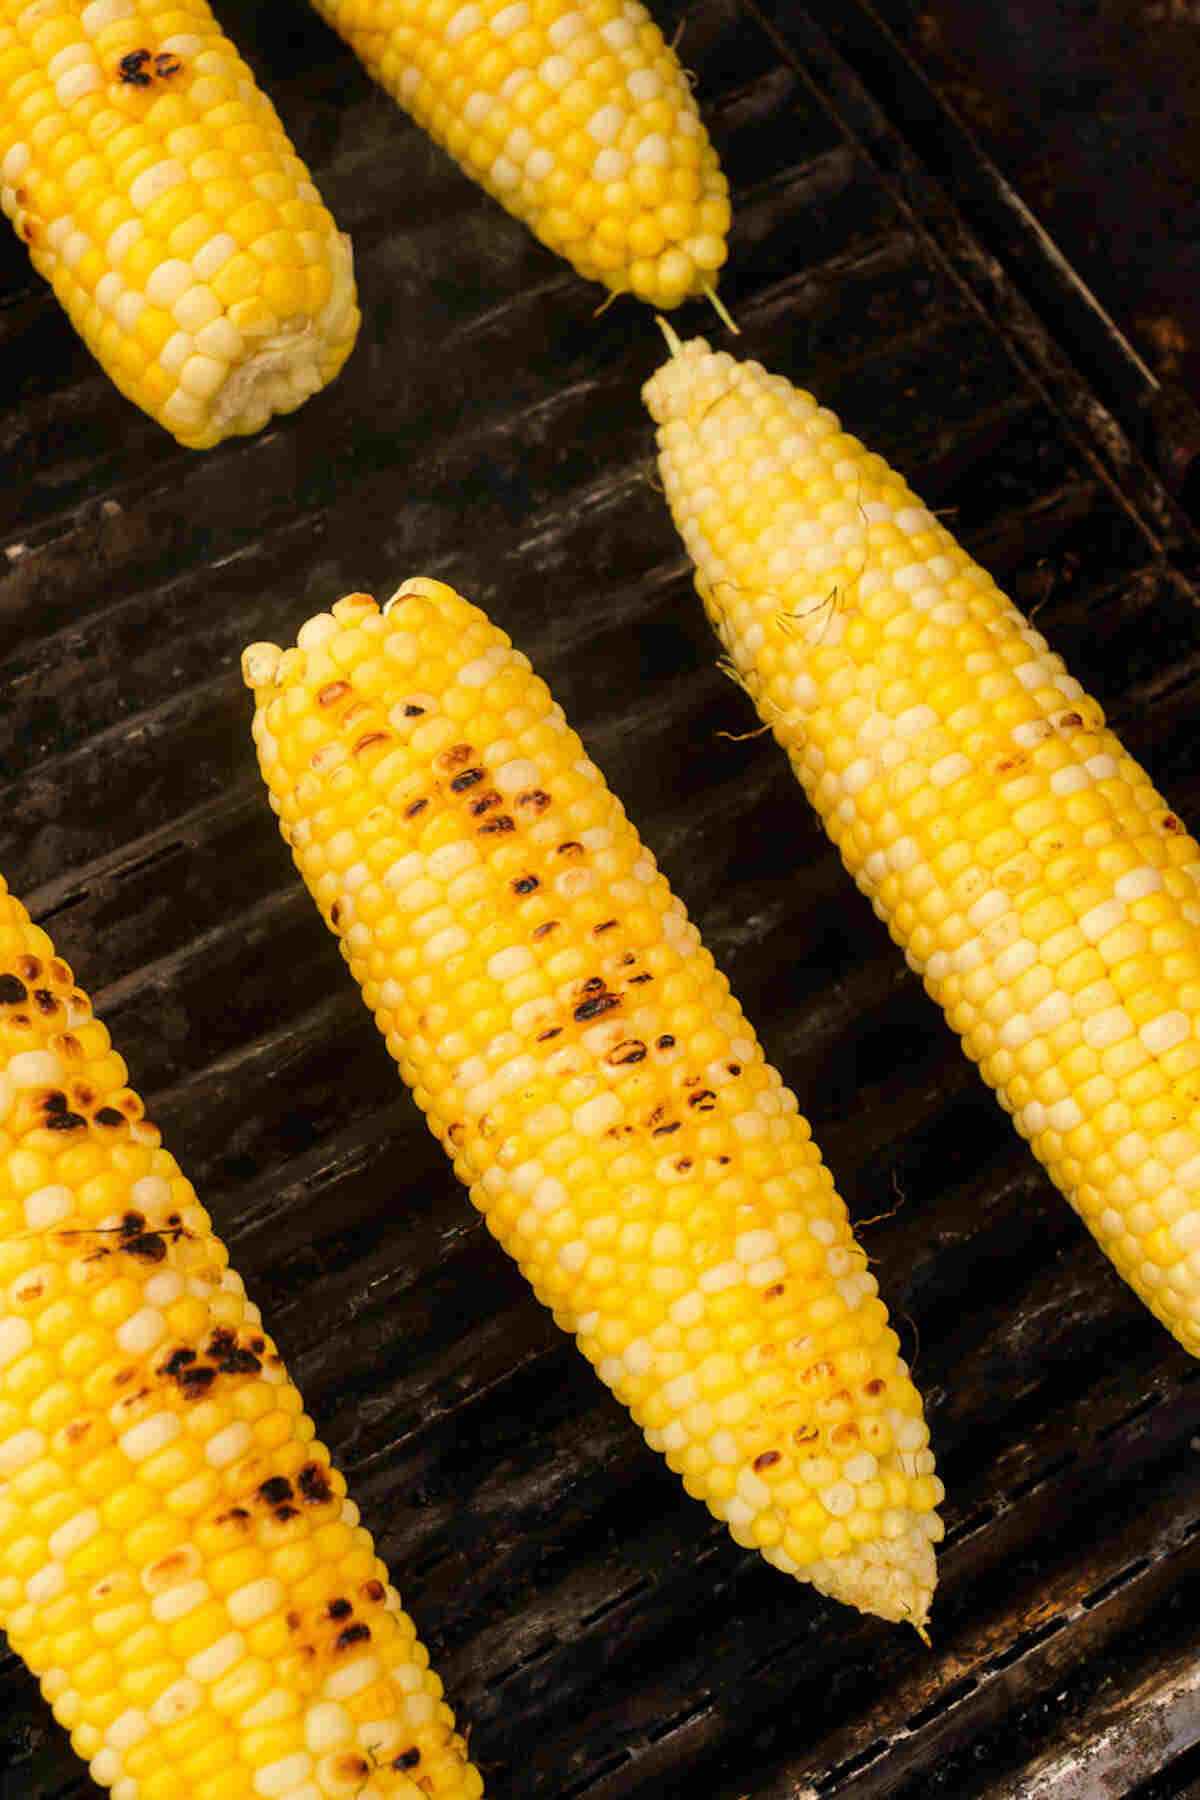 corn on the cob being cooked on the grill